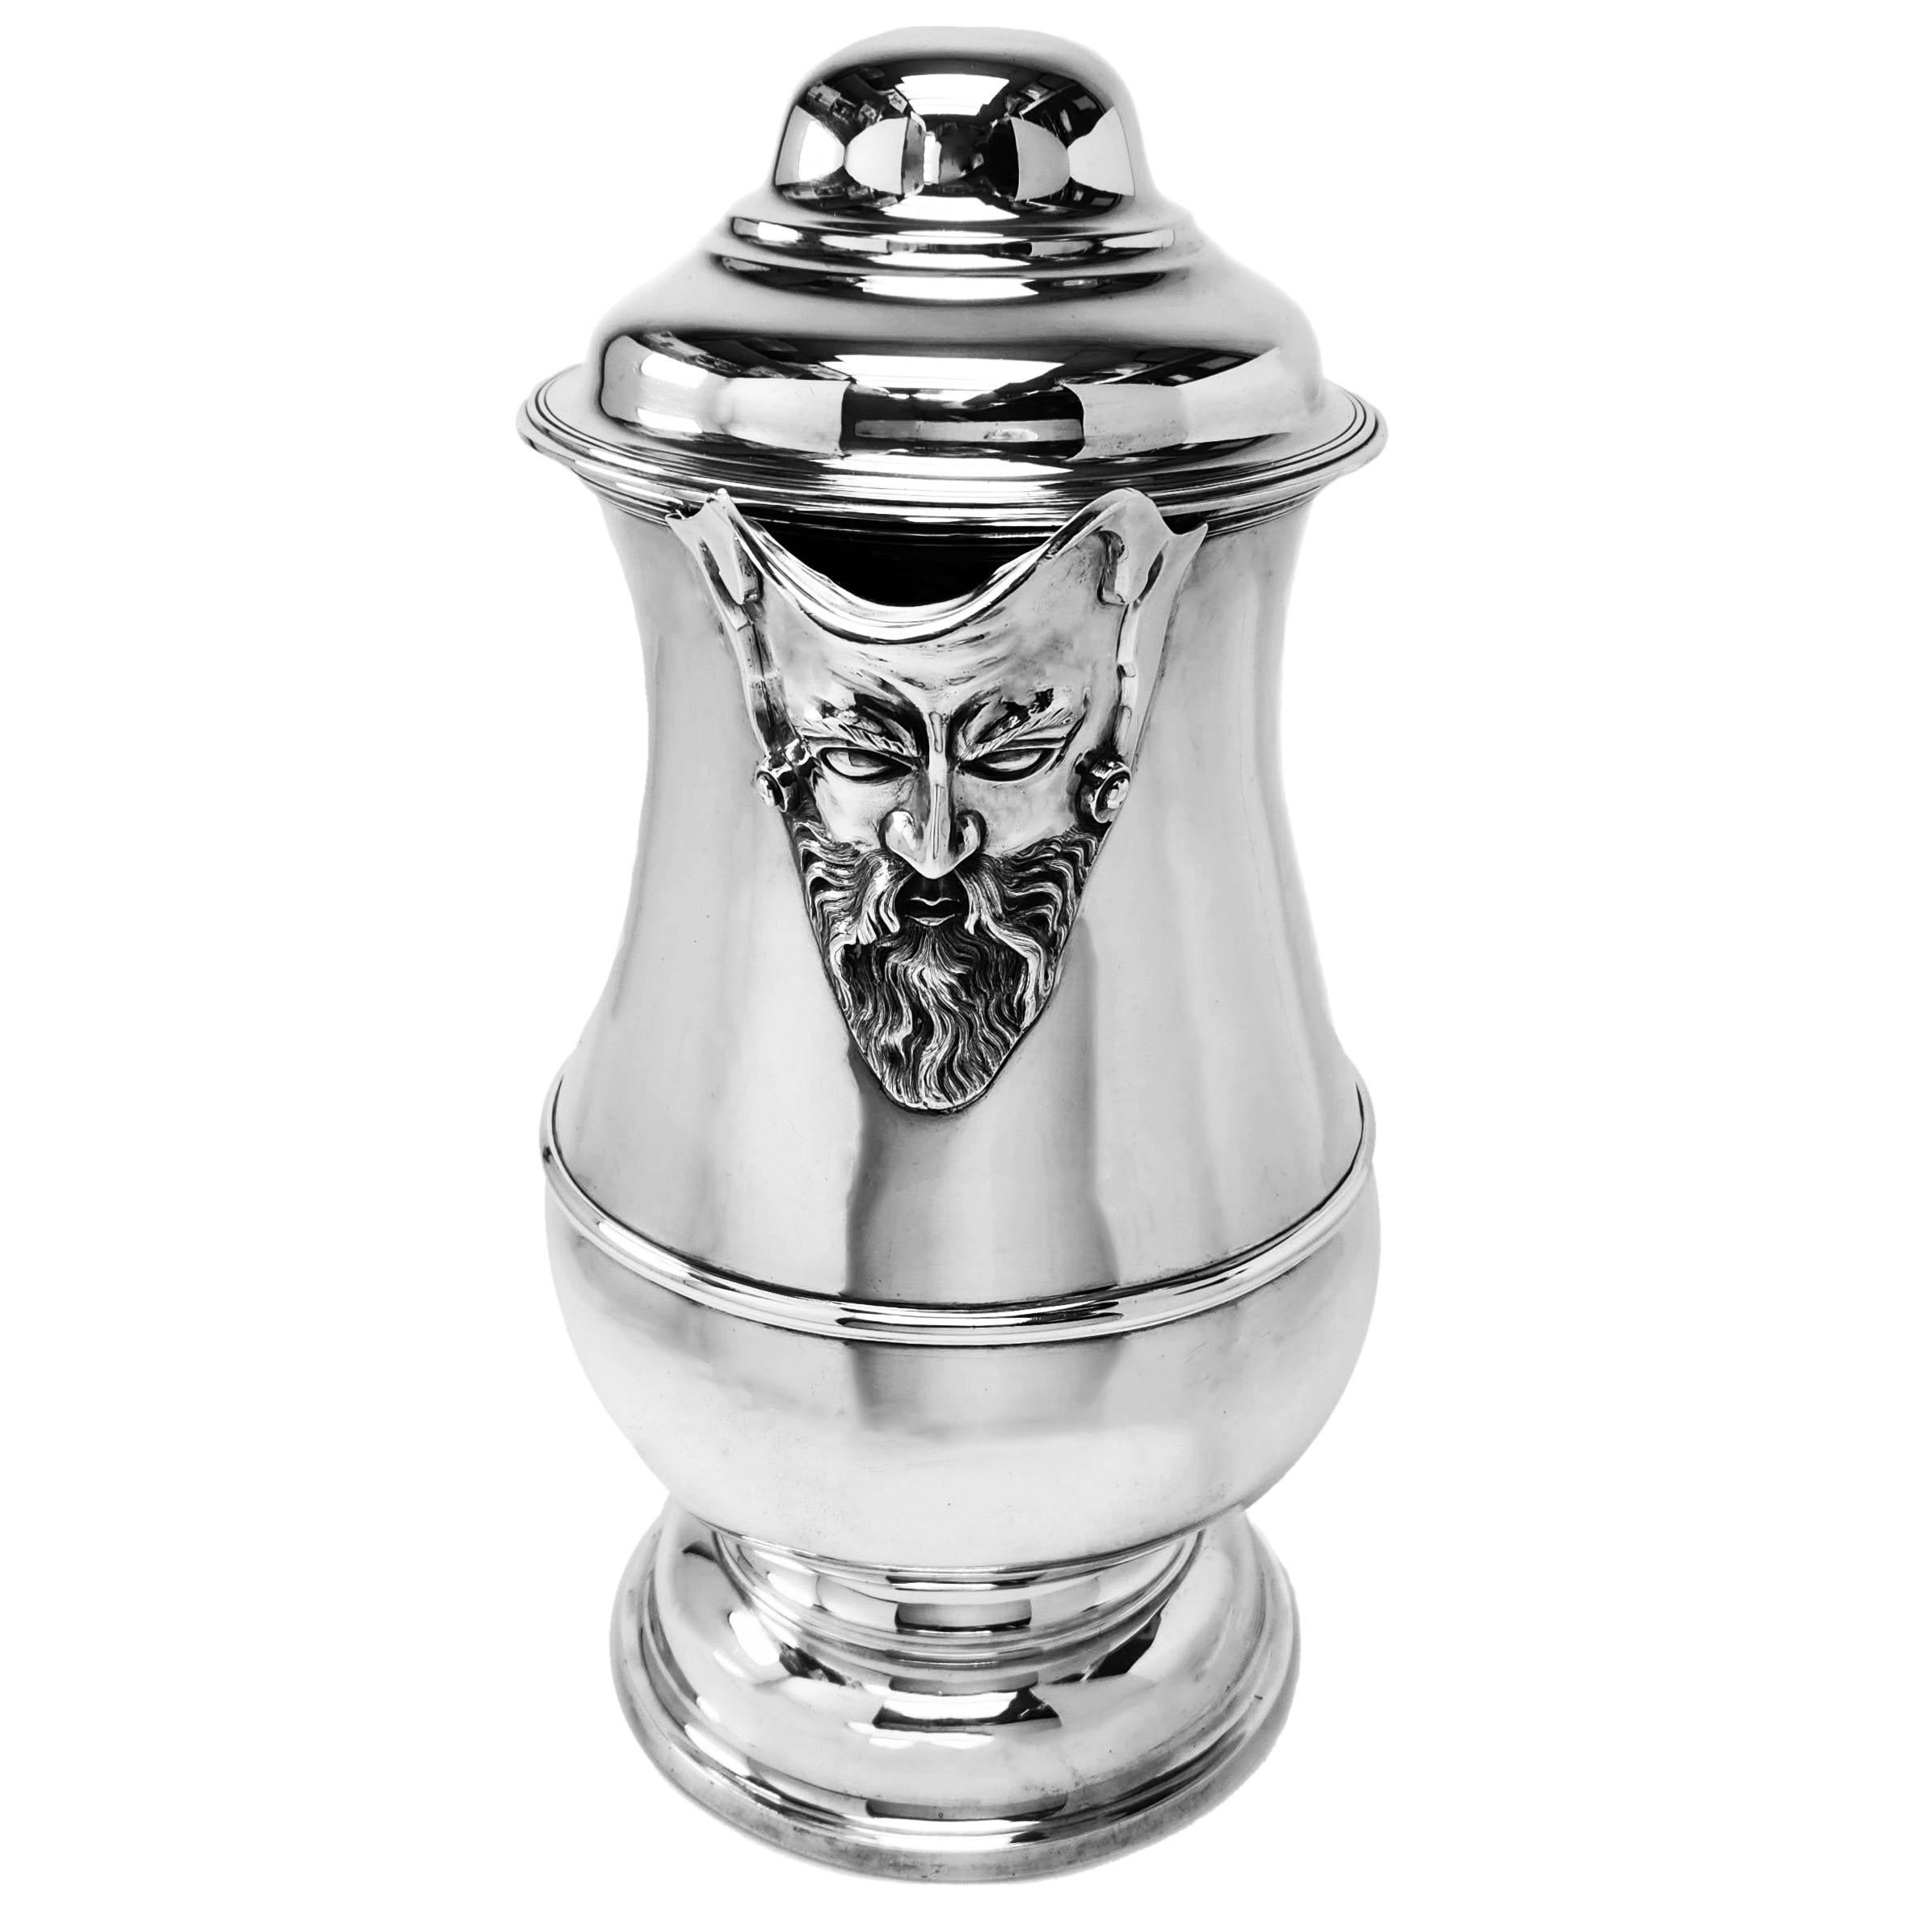 A magnificent oversized Antique Victorian Silver Flagon in the style of a Georgian Silver Ale Jug. This Ale Flagon has a classic baluster shaped form and stands on a domed pedestal foot. The Flagon has an impressive chased face embellishing the